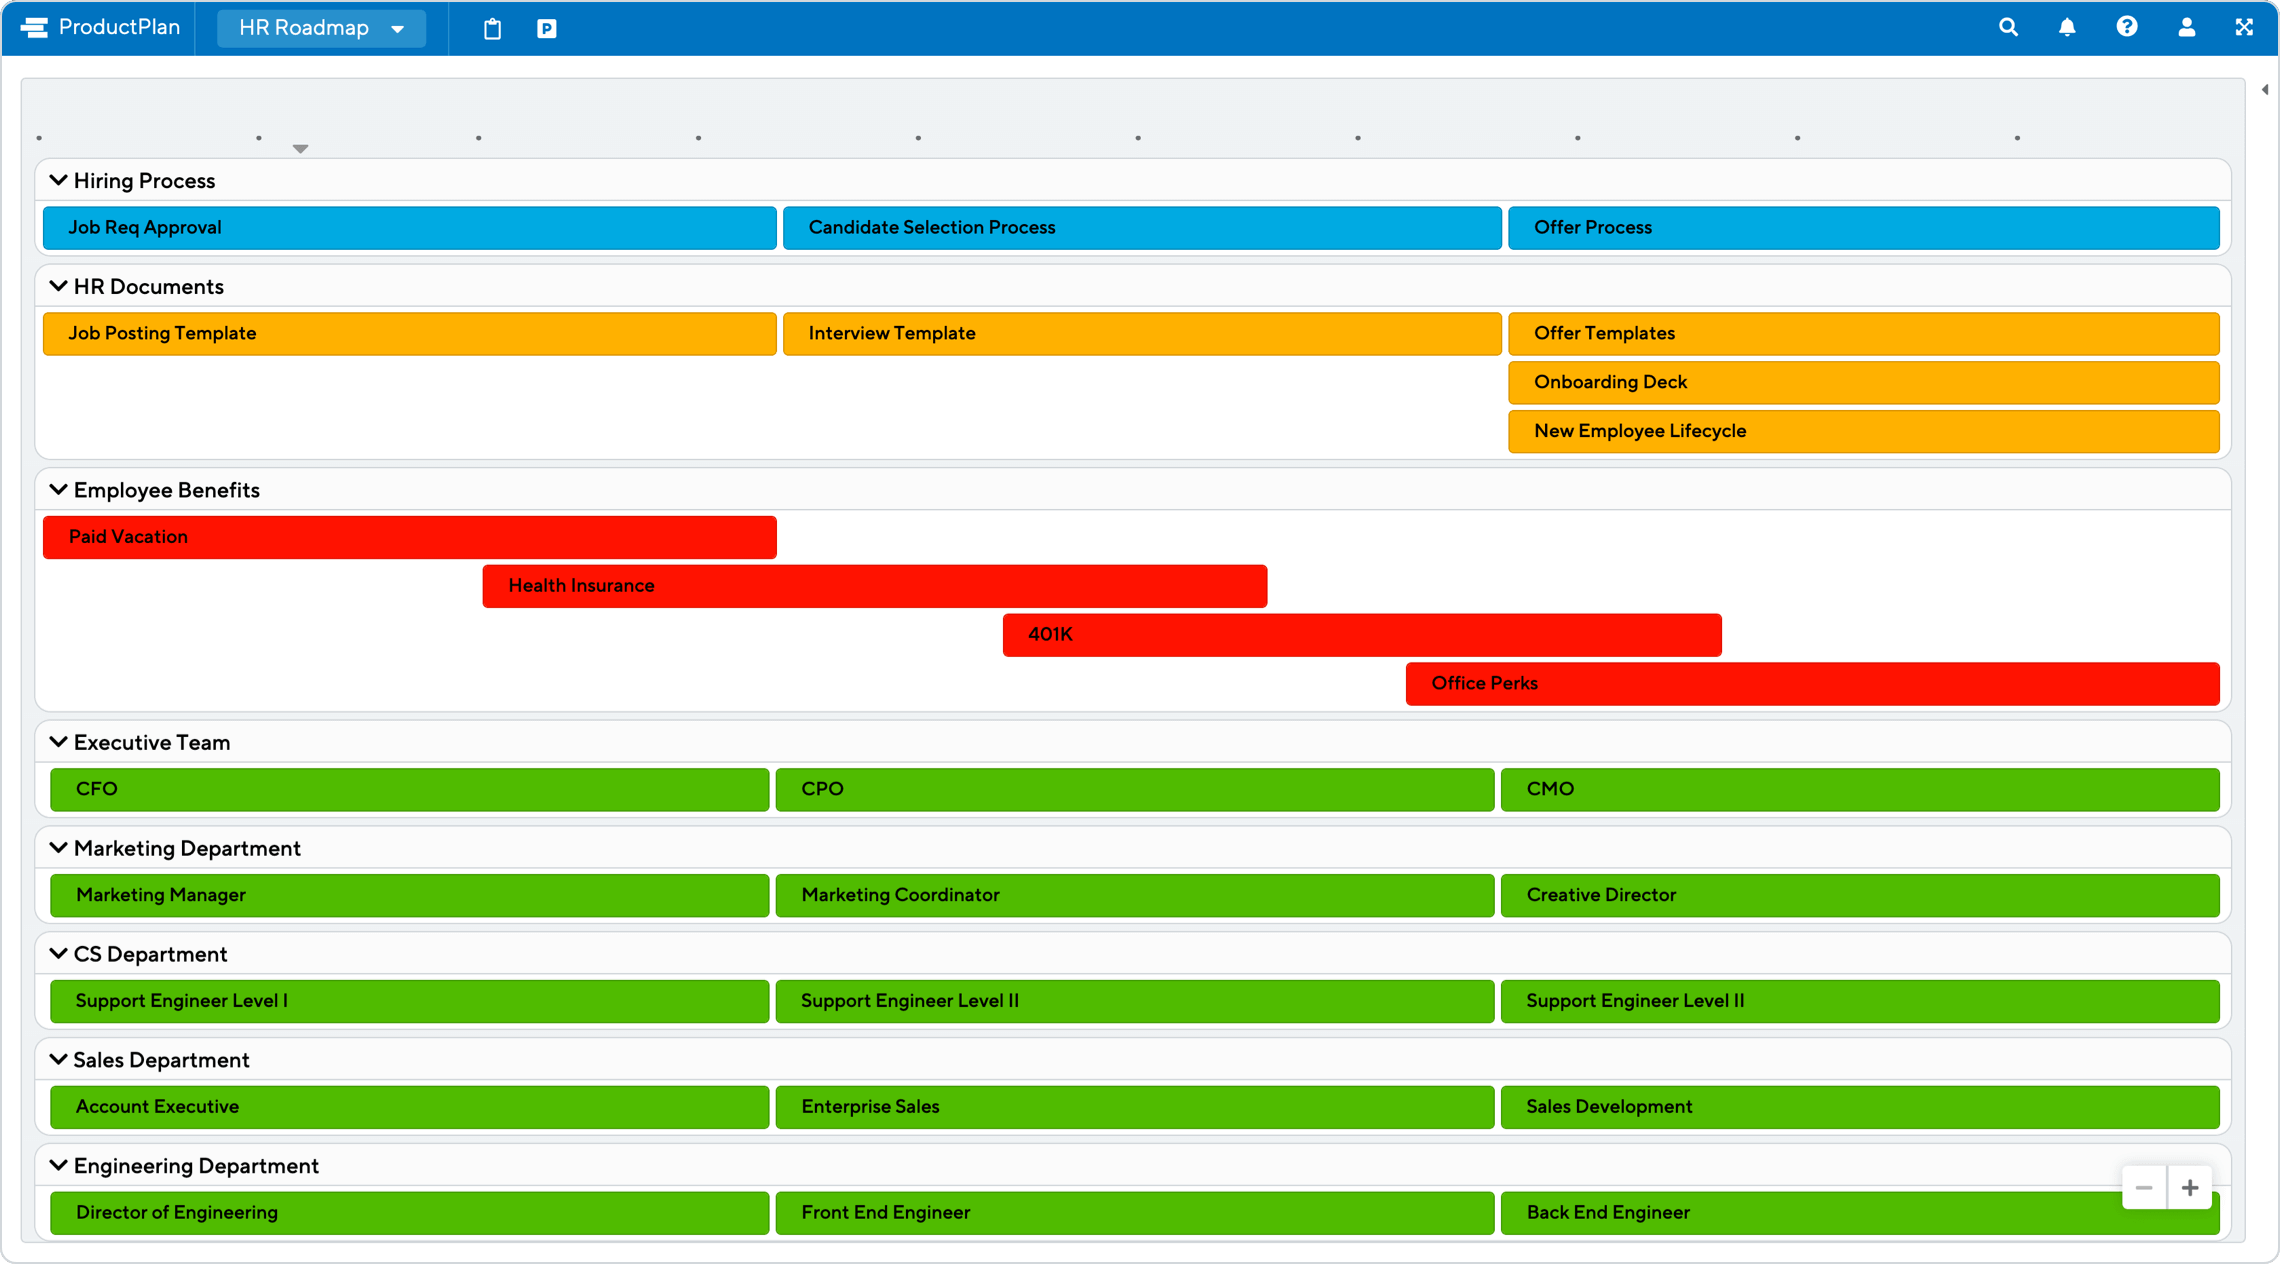 HR Roadmap Template by ProductPlan